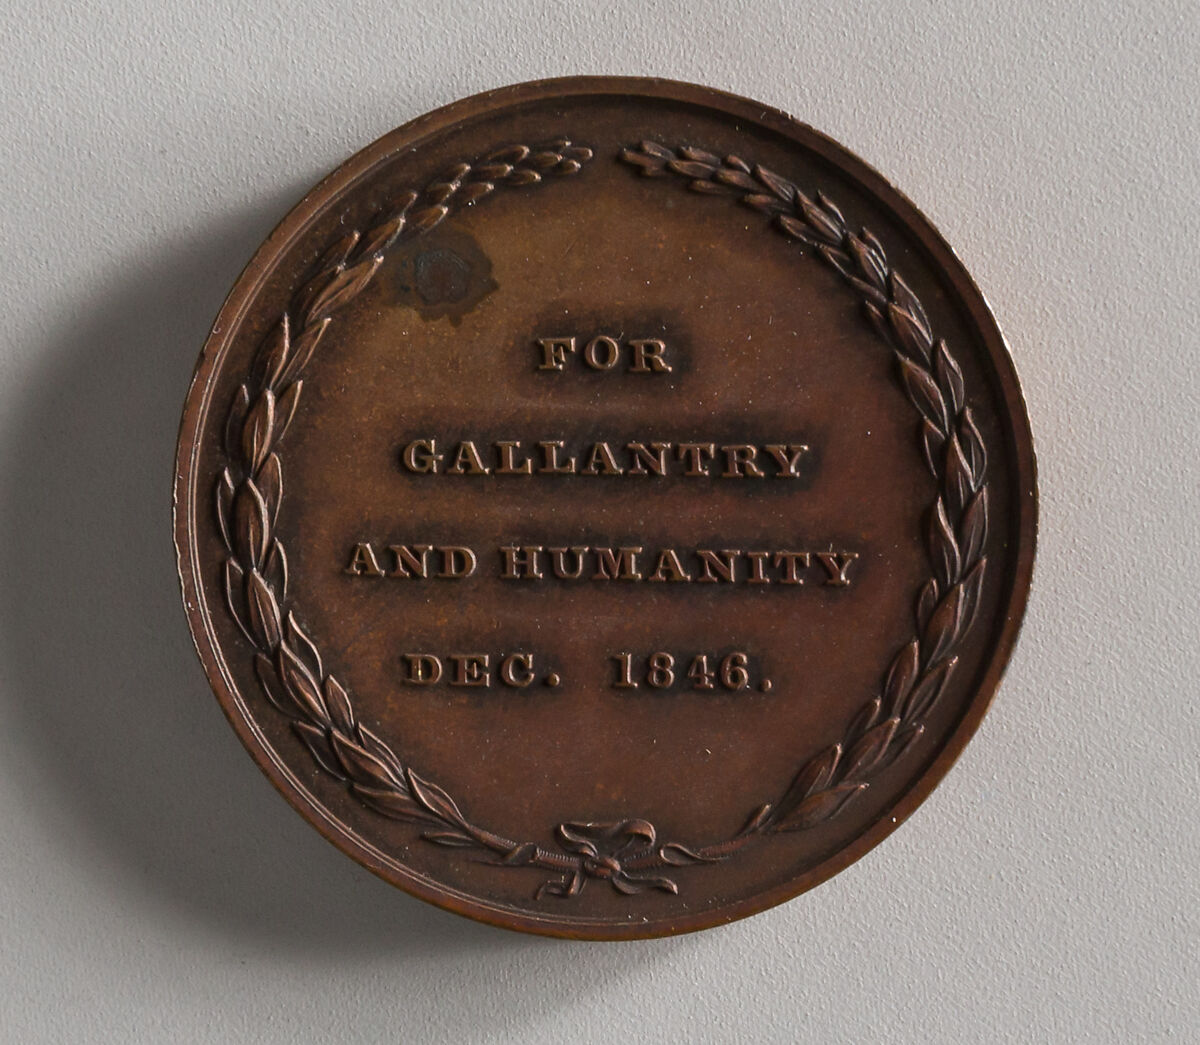 Blank Award of the U.S. Coast Survey for "Gallery and Humanity", Bronze, American 